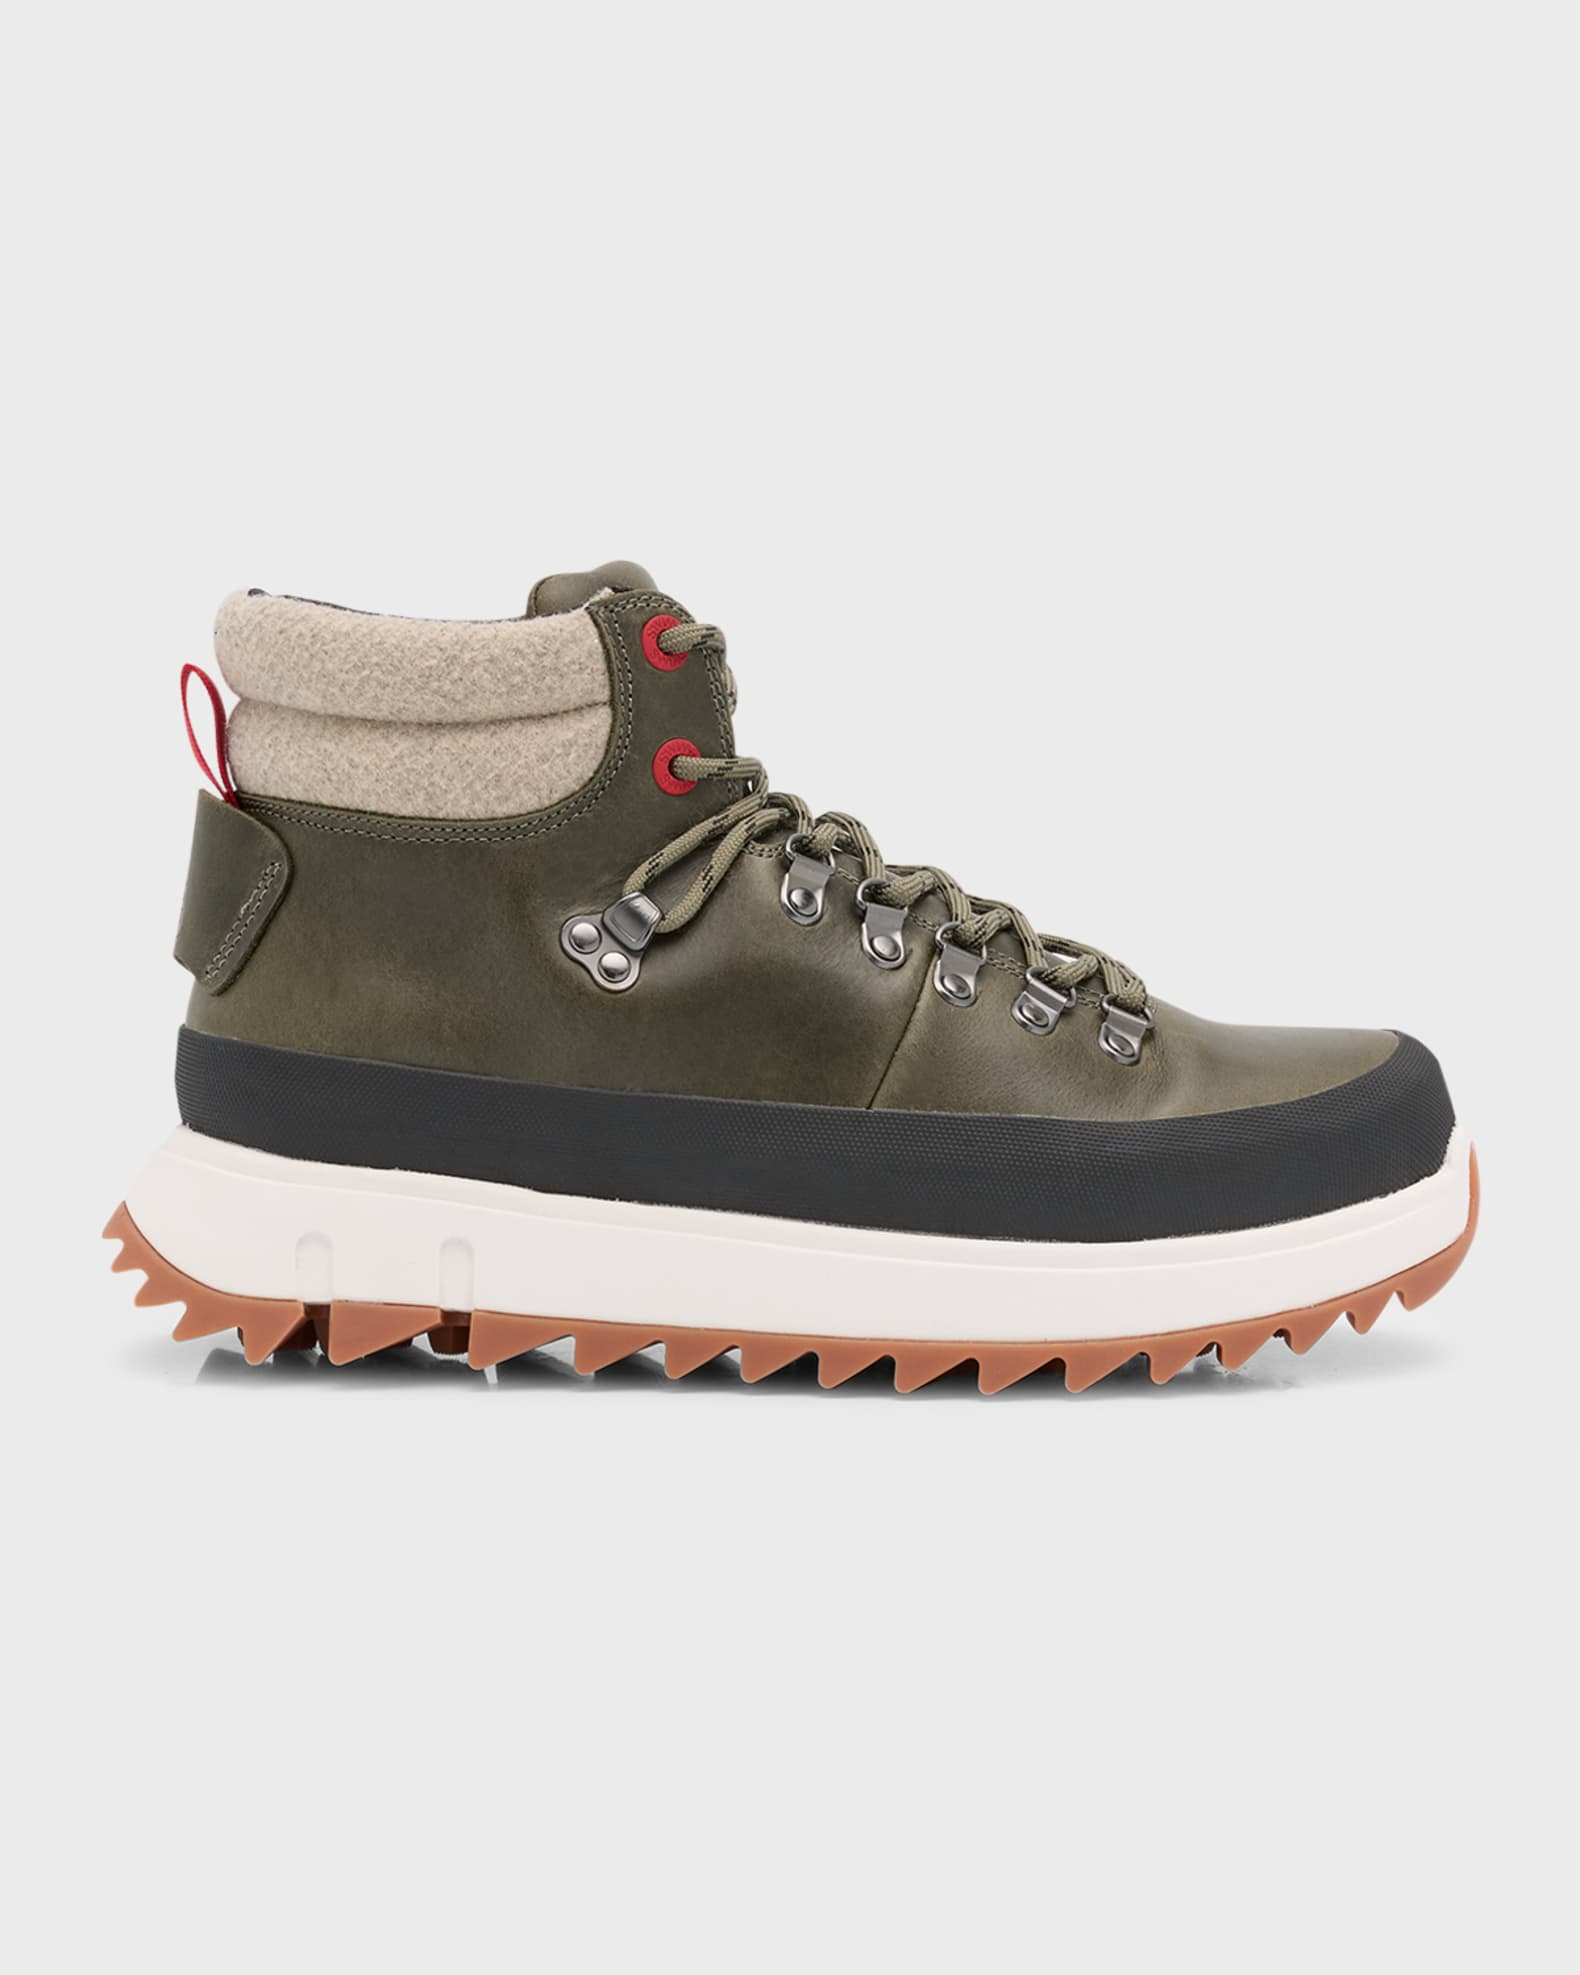 Swims Men's Fjell Leather Lace-Up Boots | Neiman Marcus